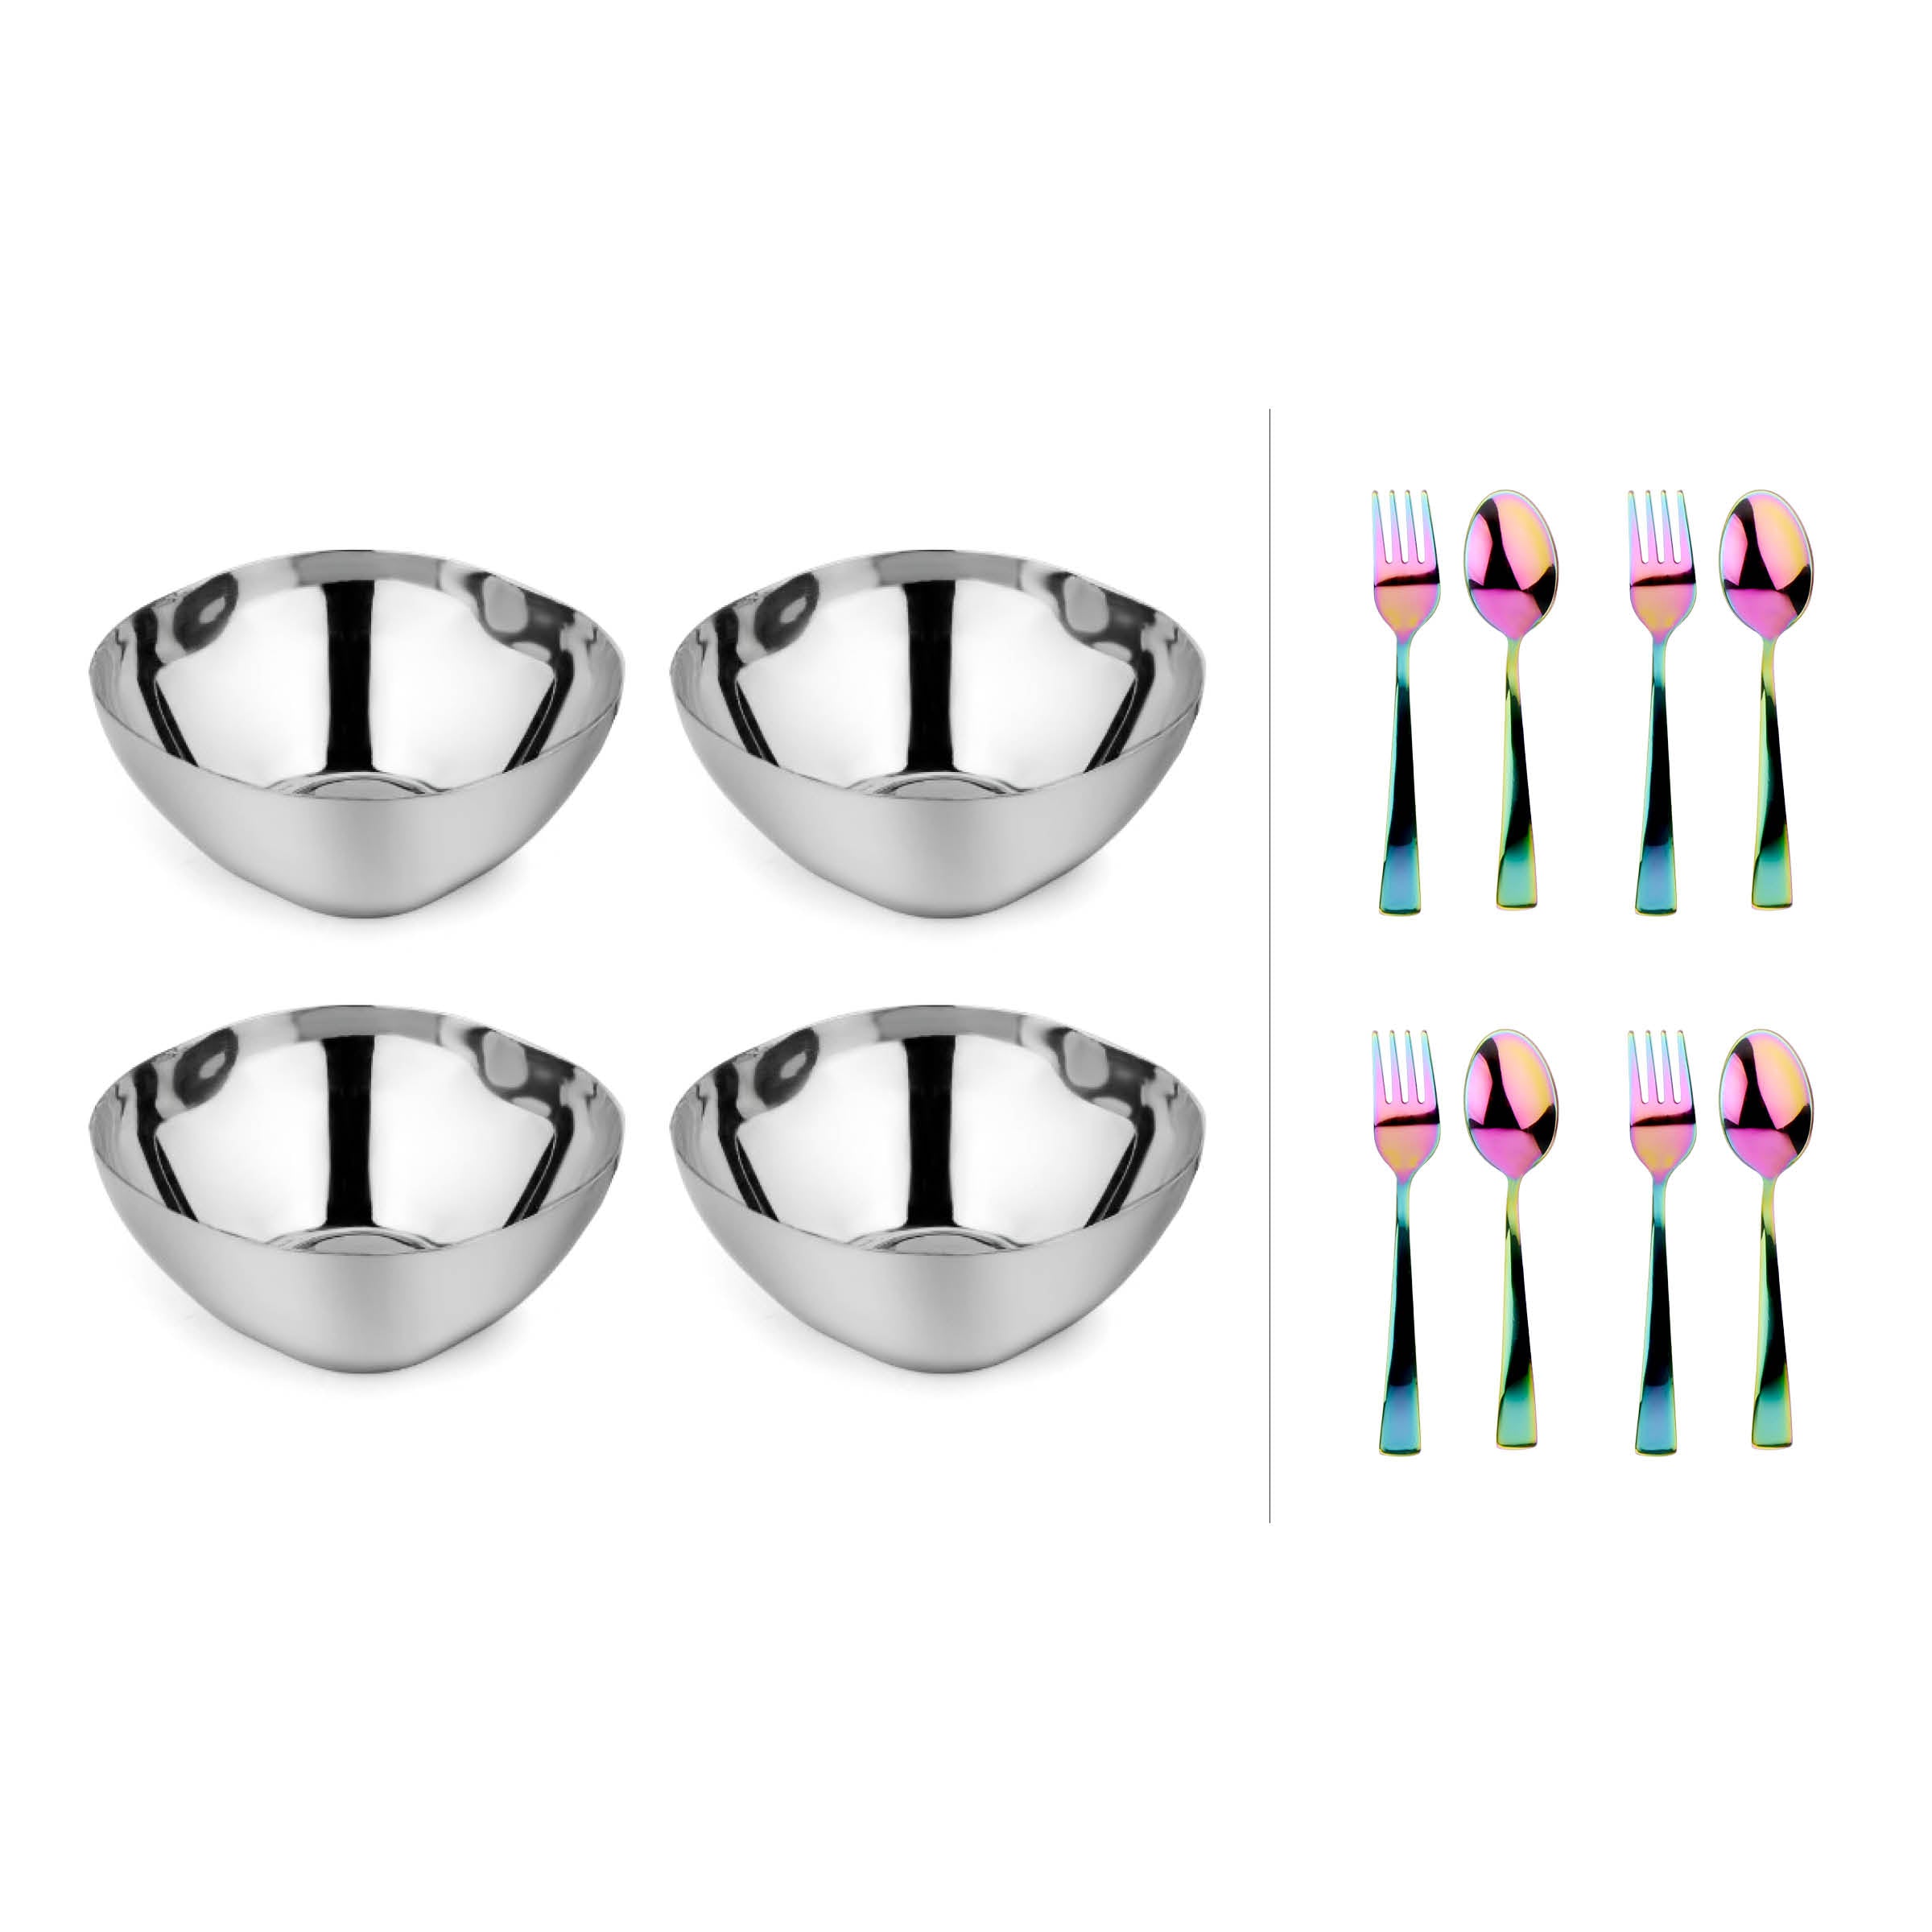 Snack Set - 4 Smart Snacking Bowls, 4 Forks and 4 Spoons